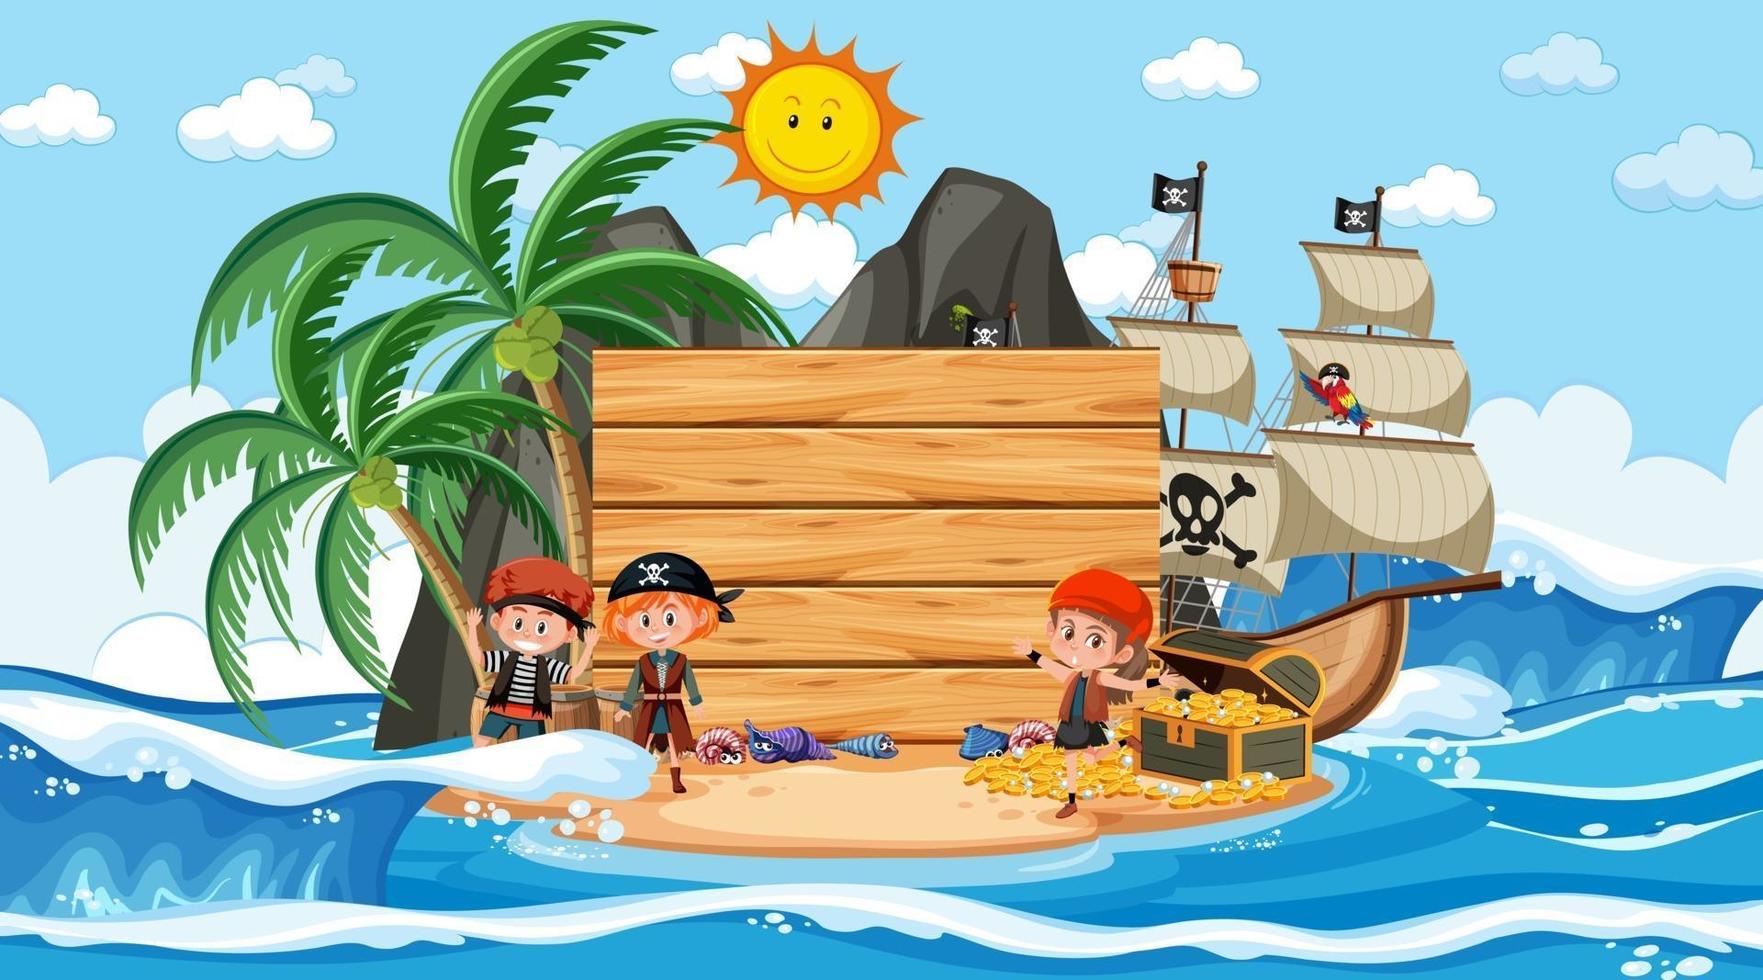 Pirate kids at the beach daytime scene with an empty banner template vector